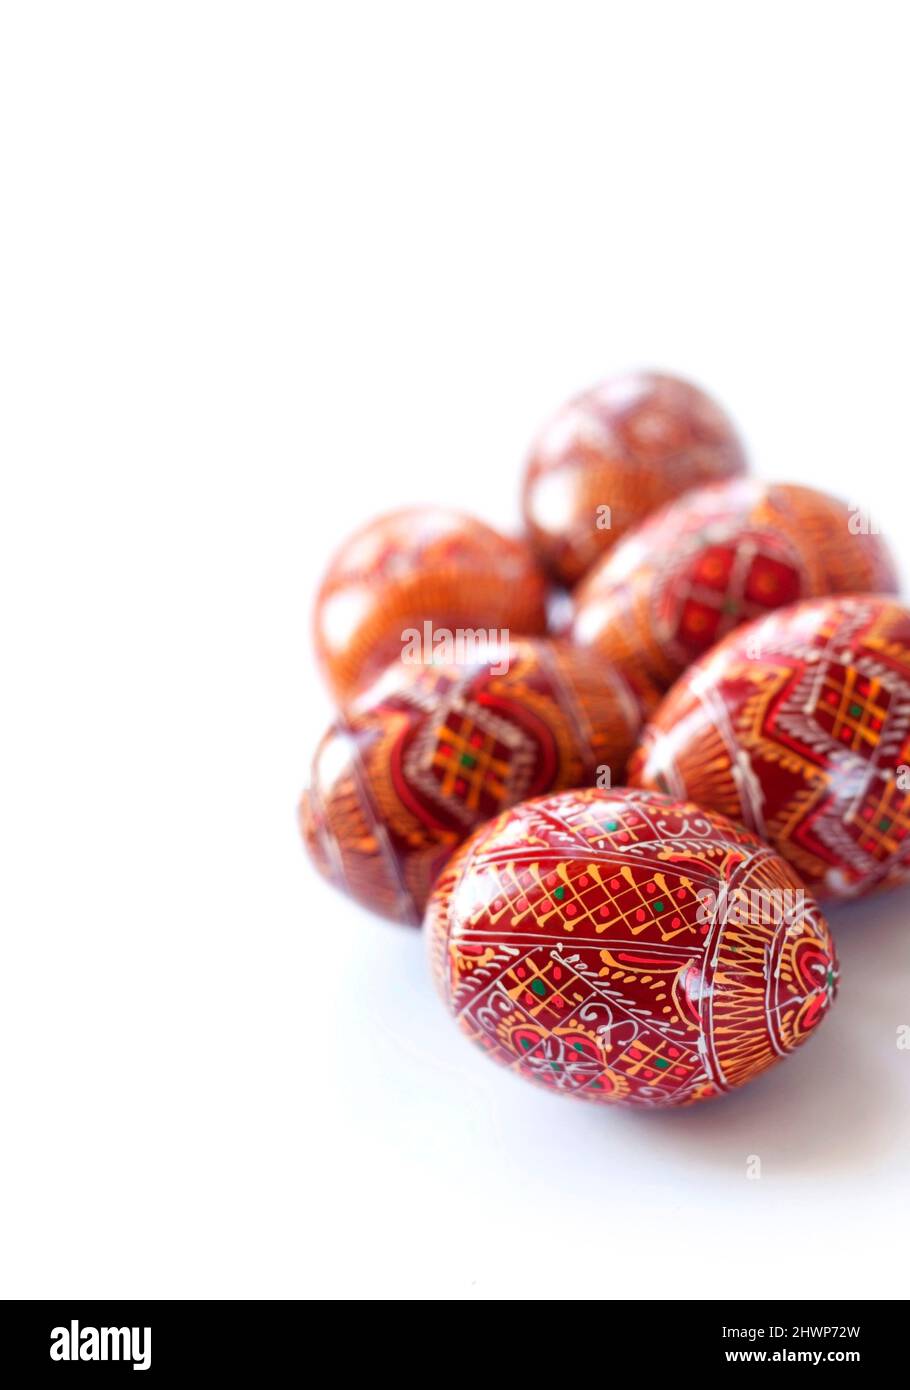 Pysanky - Ukrainian traditional painted Easter eggs on white background. Copy space Stock Photo